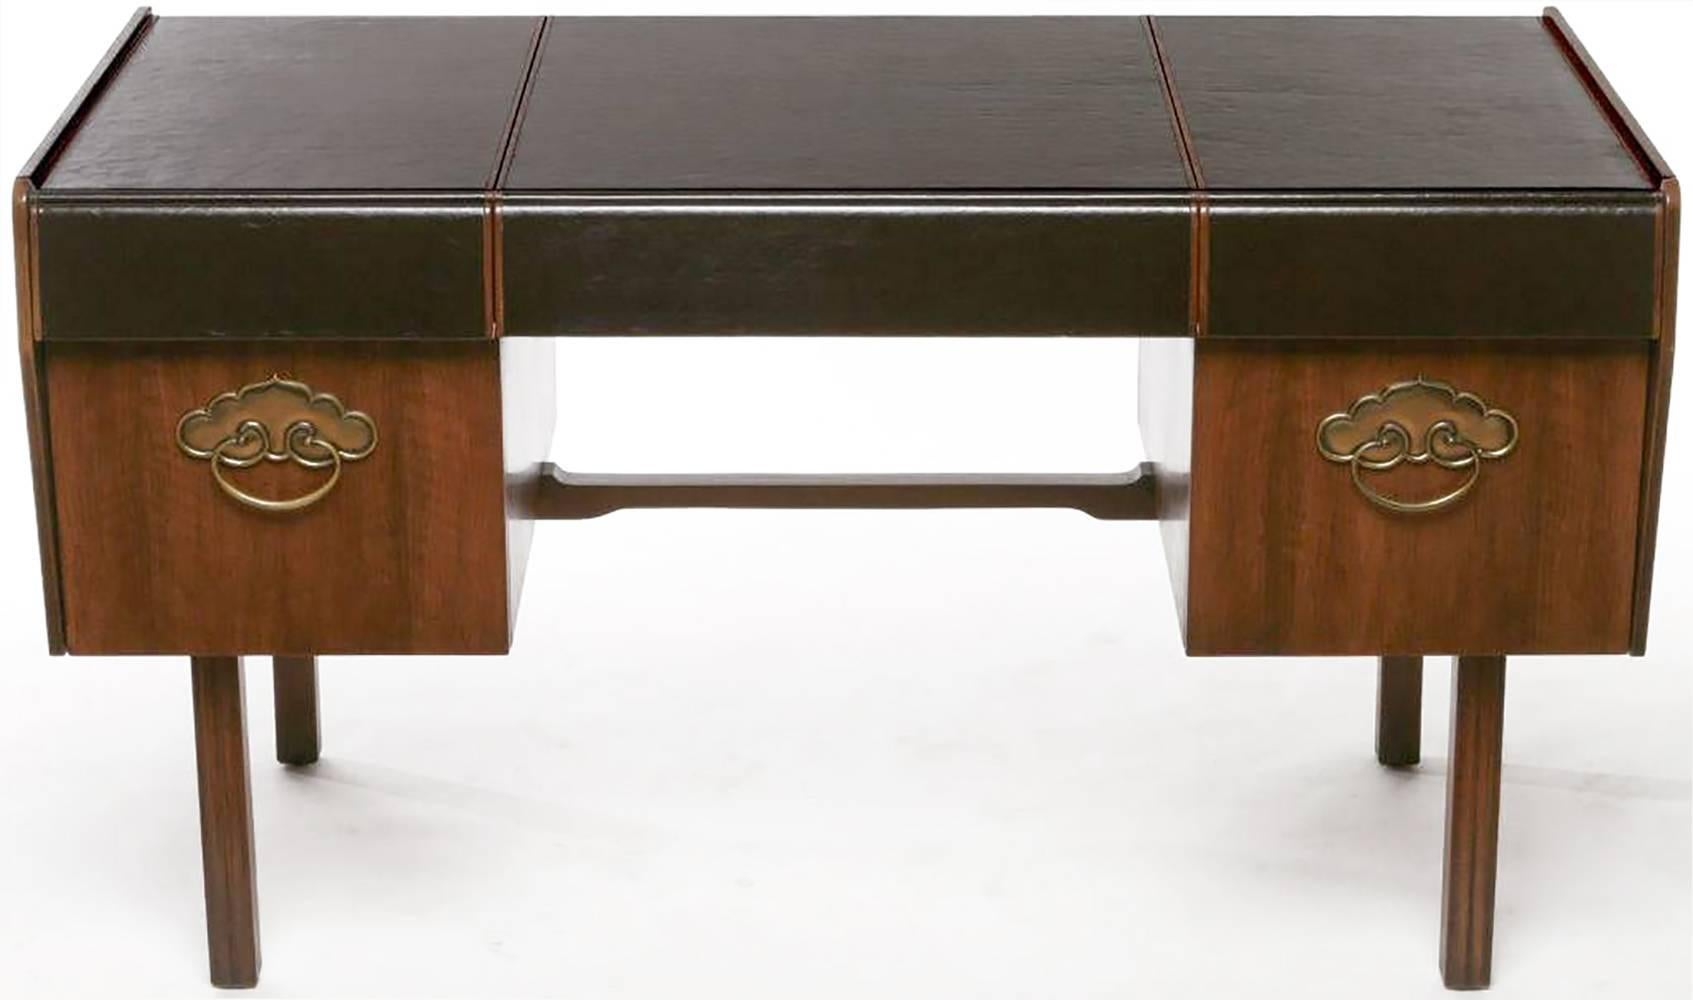 From California designer Bert England's Orientation Group for John Widdicomb Company, this extraordinary desk is made of Persian walnut and solid mahogany. 

Wrapping around the front and back, including upper drawer fronts, the black leather top